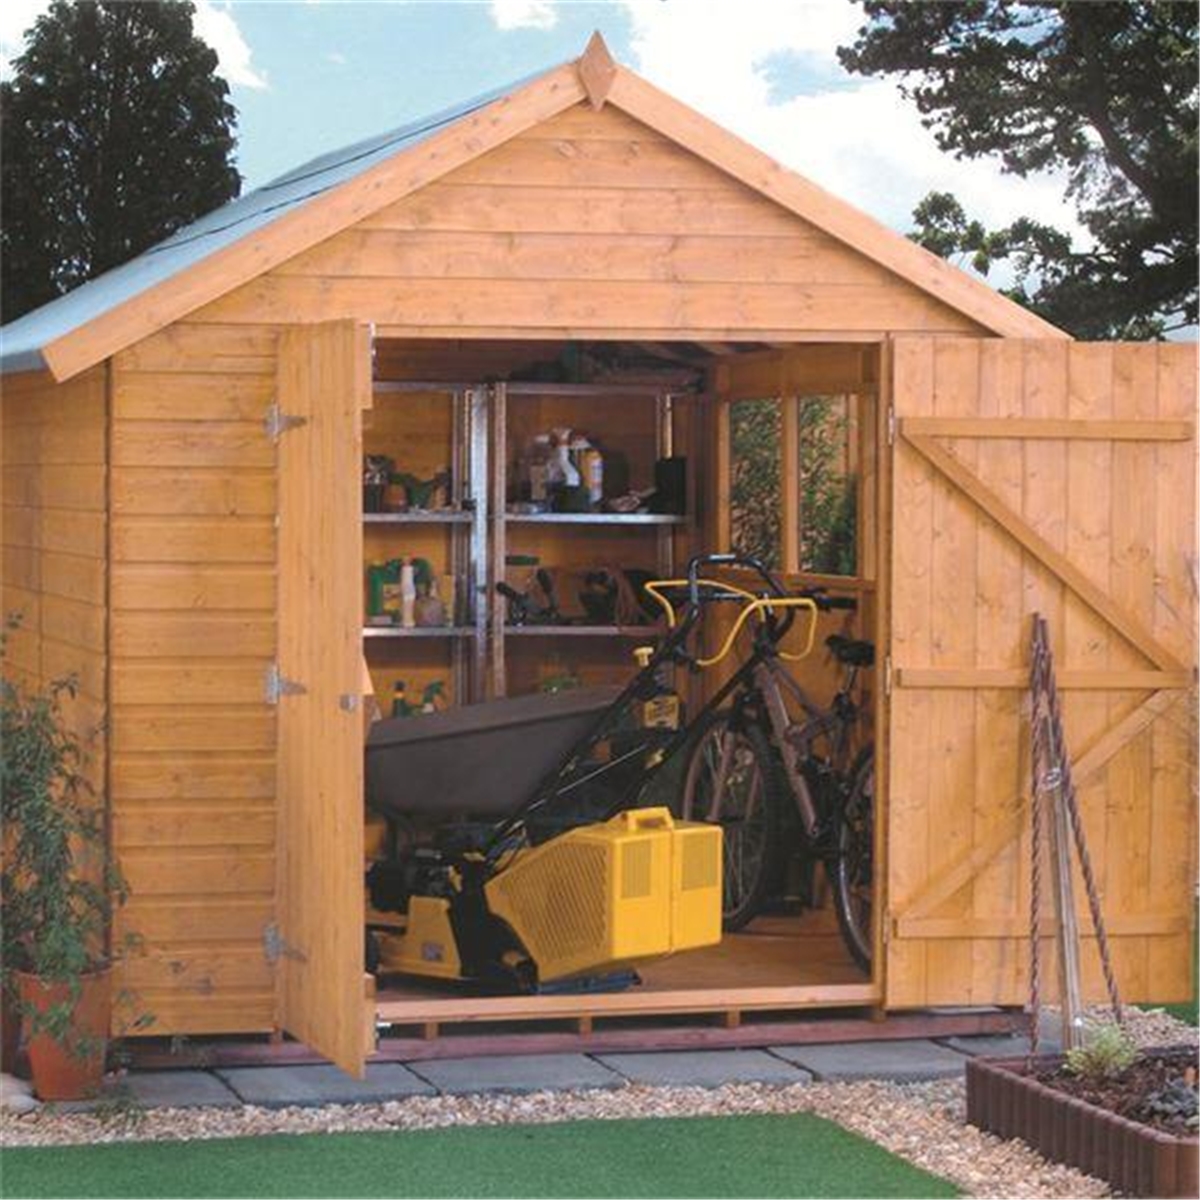 Cheshire : 12ft x 8ft Deluxe Tongue and Groove Shed (12mm Tongue and 